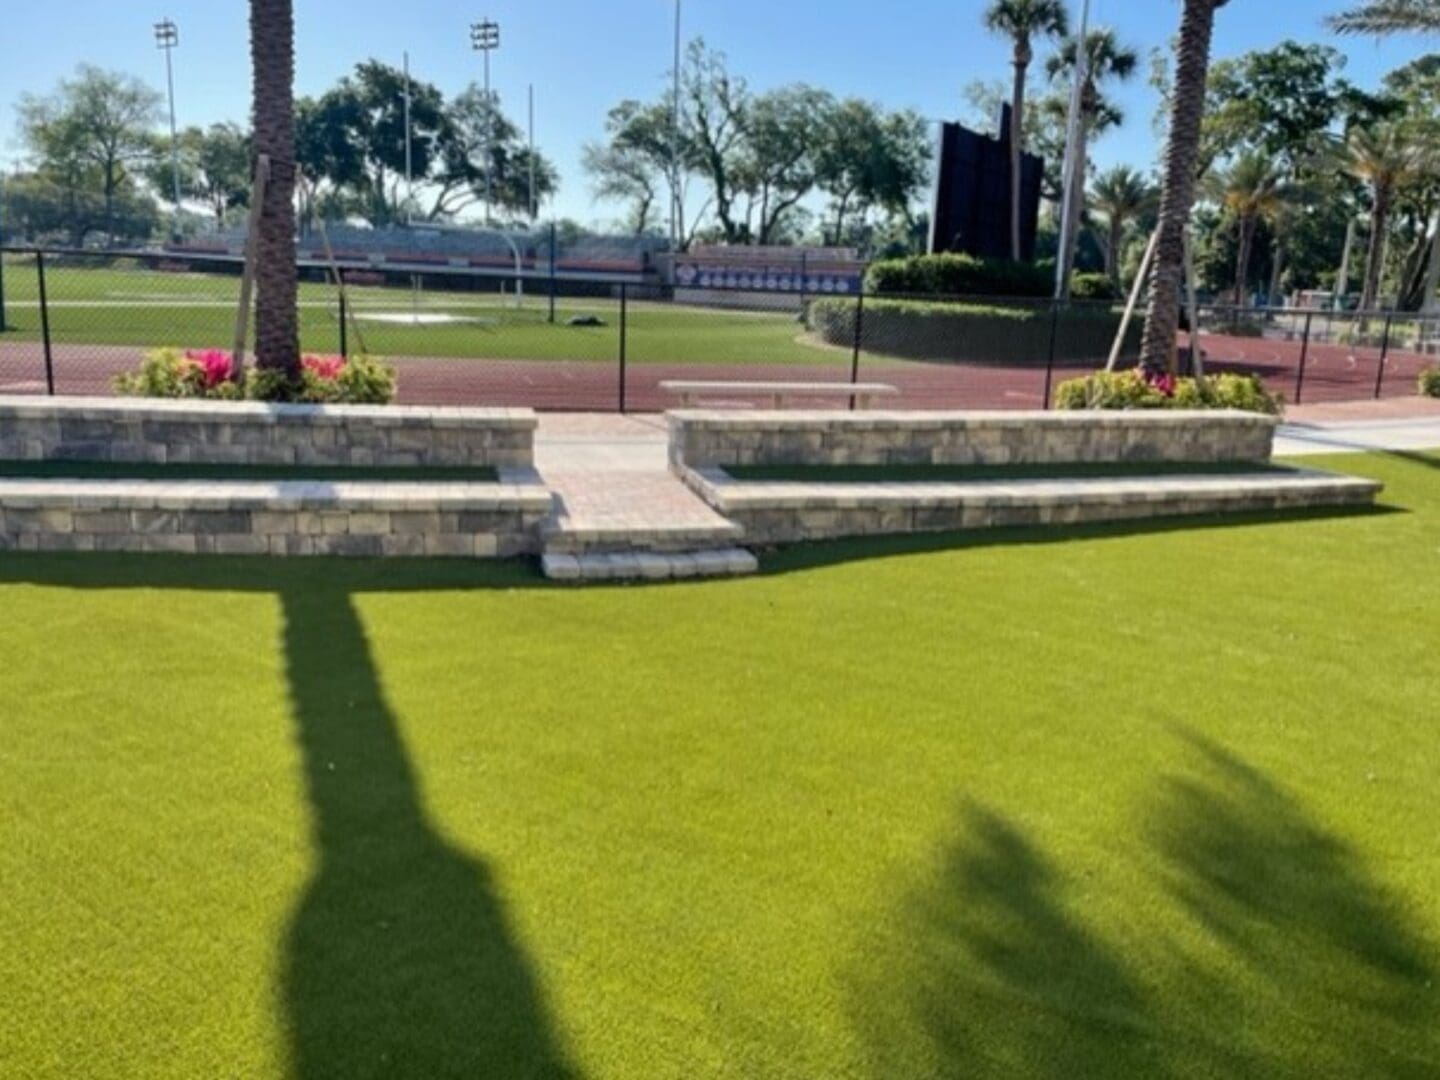 A well-manicured artificial grass area in North East Florida with a stepped retaining wall and palm trees casting long shadows.